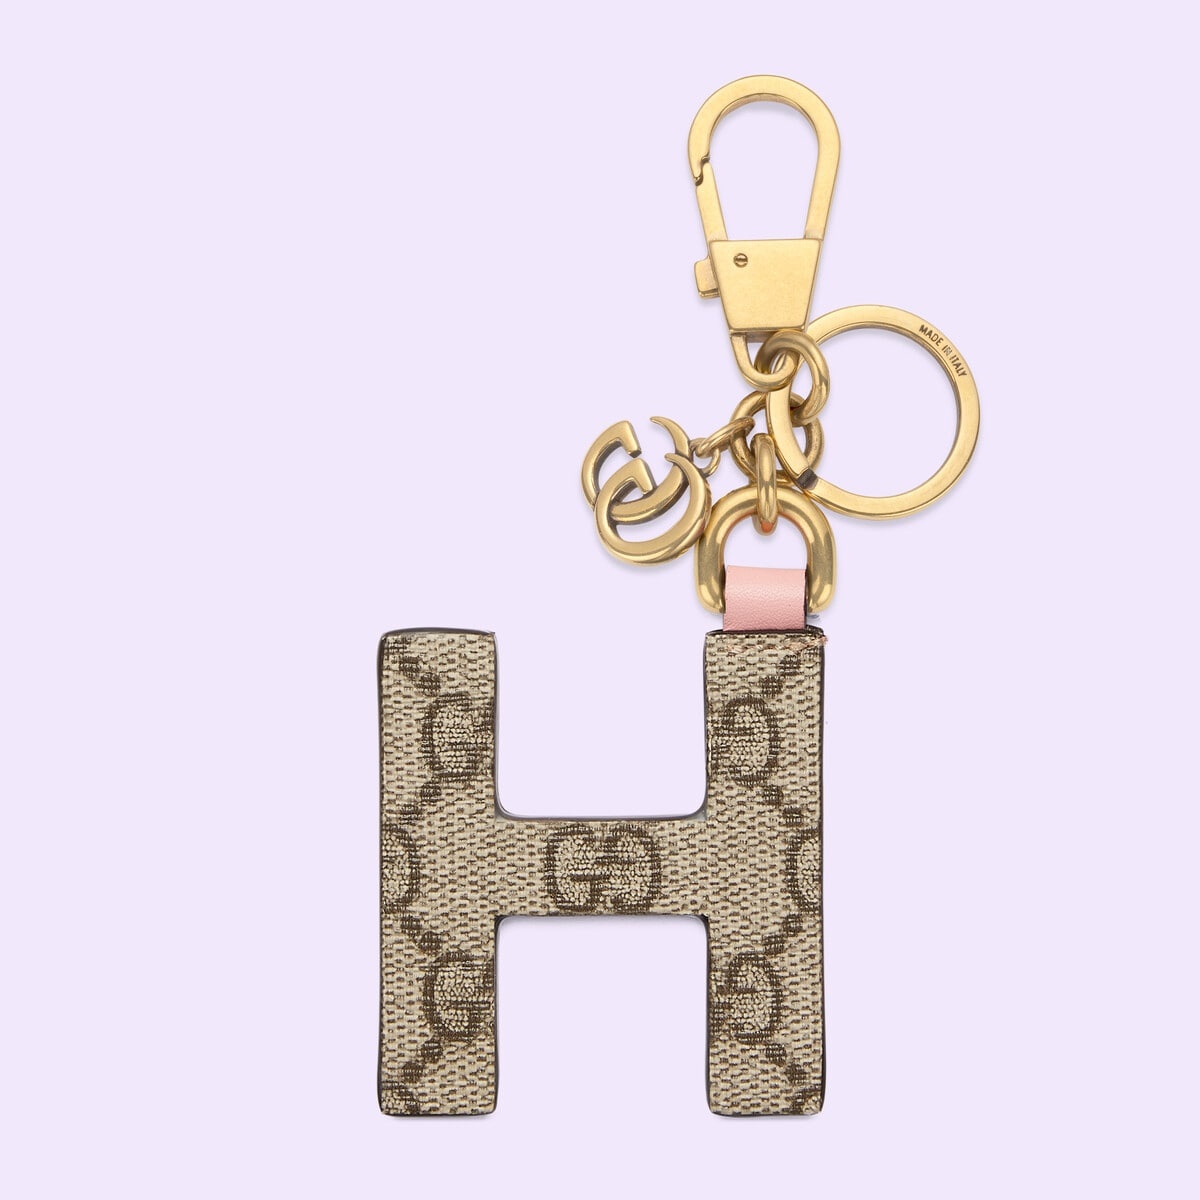 Letter H keychain - 2